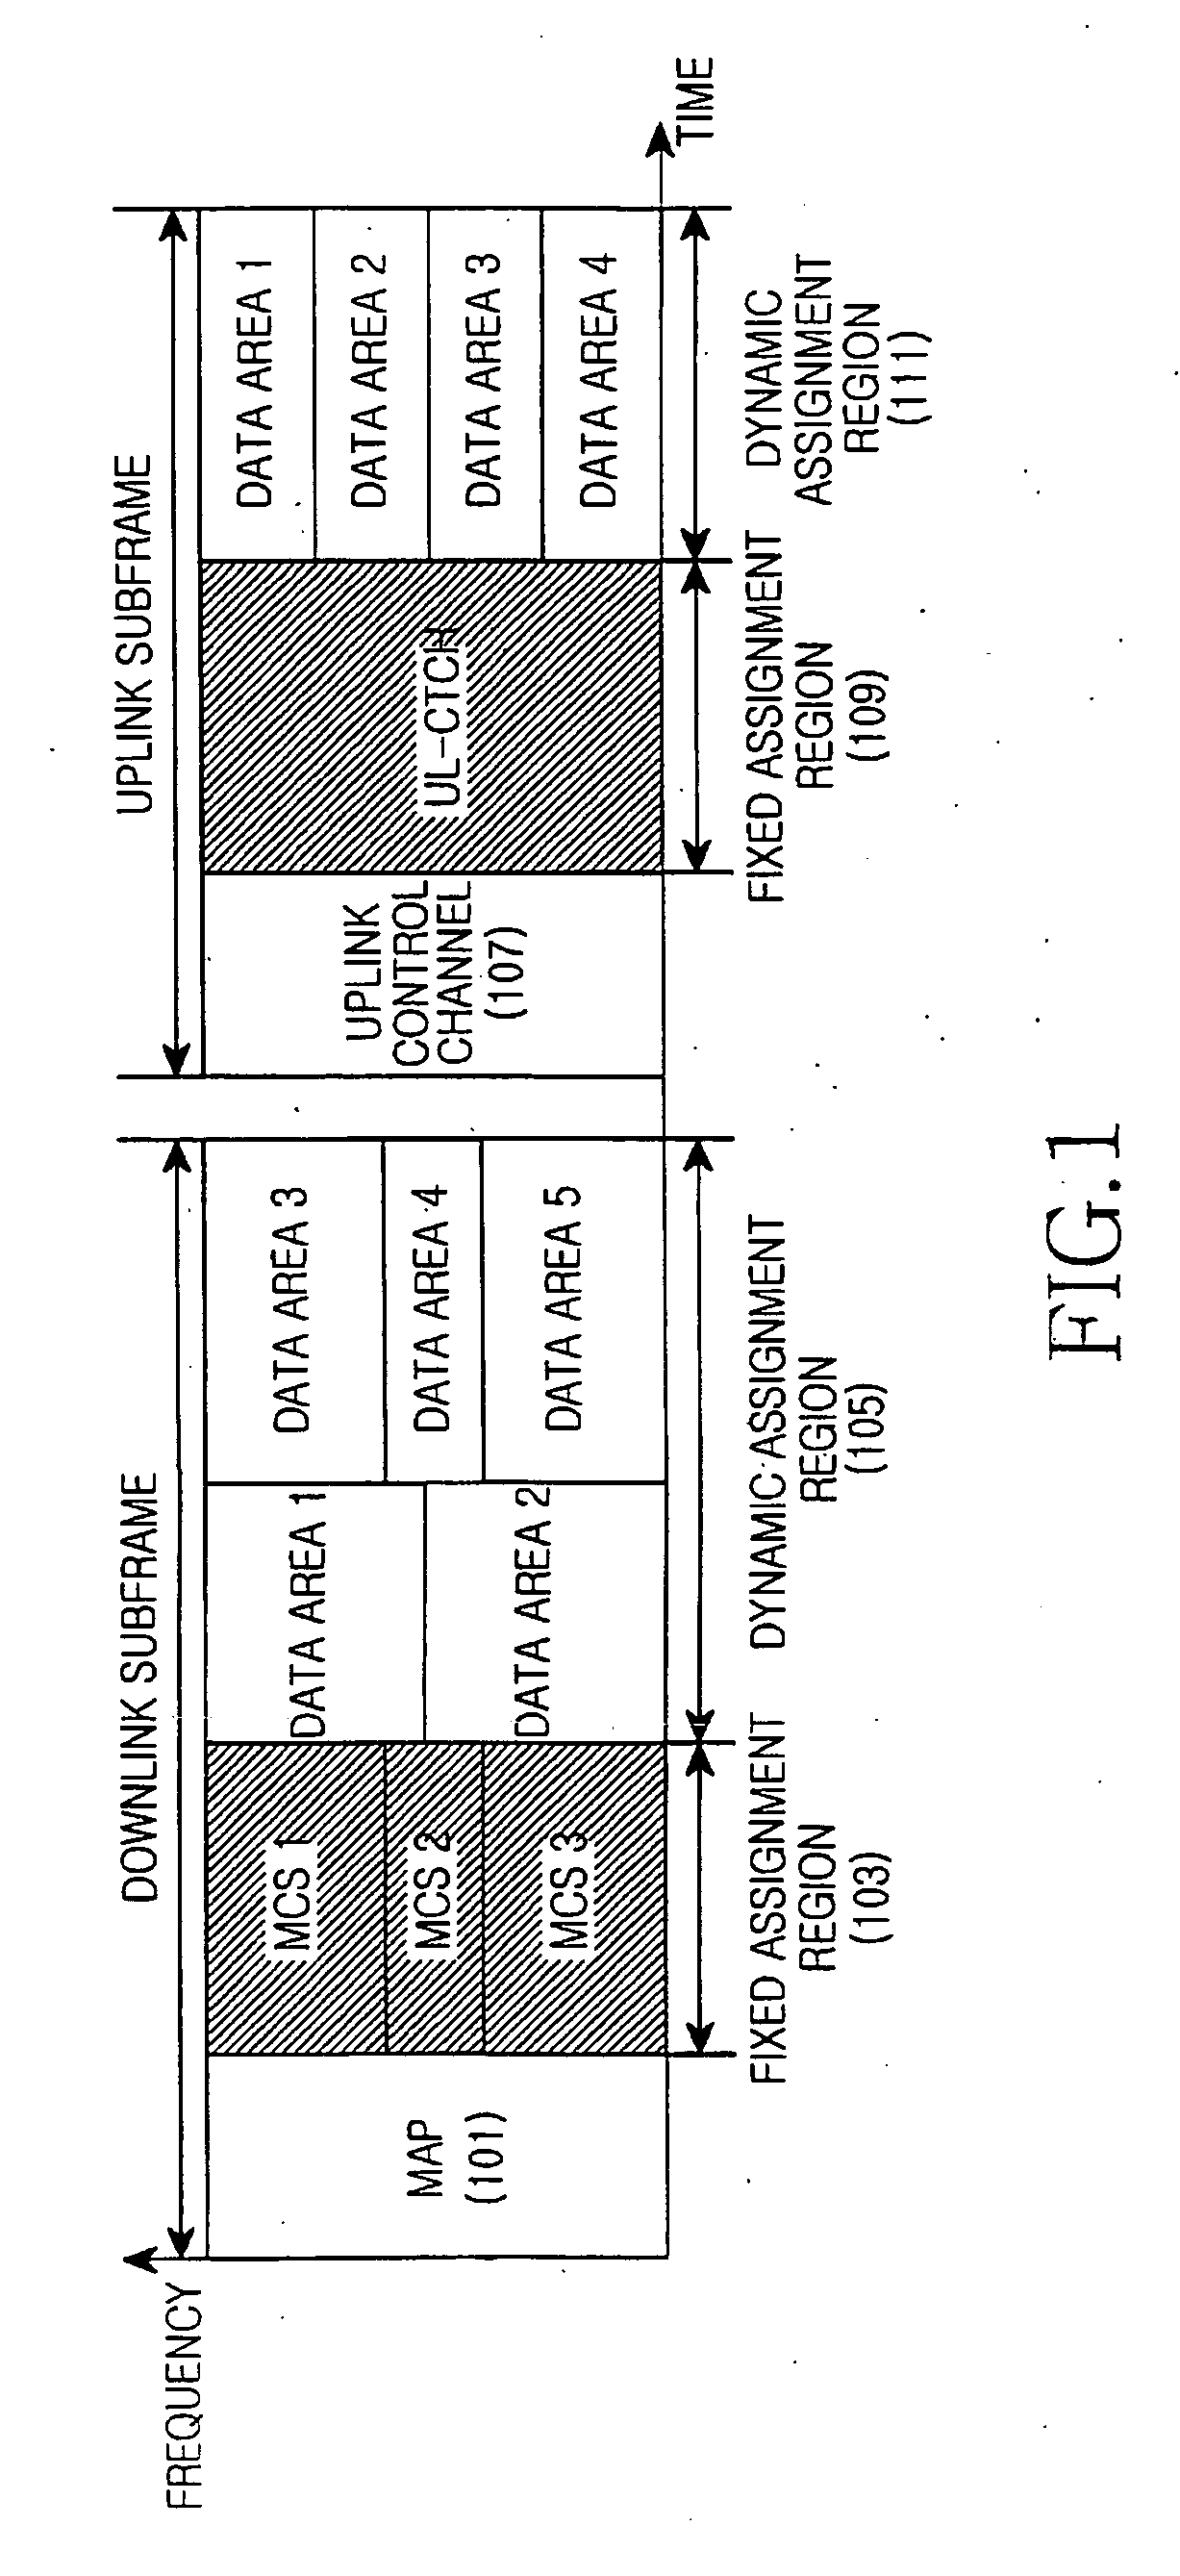 Apparatus and method for reducing map channel overhead in a broadband wireless communication system